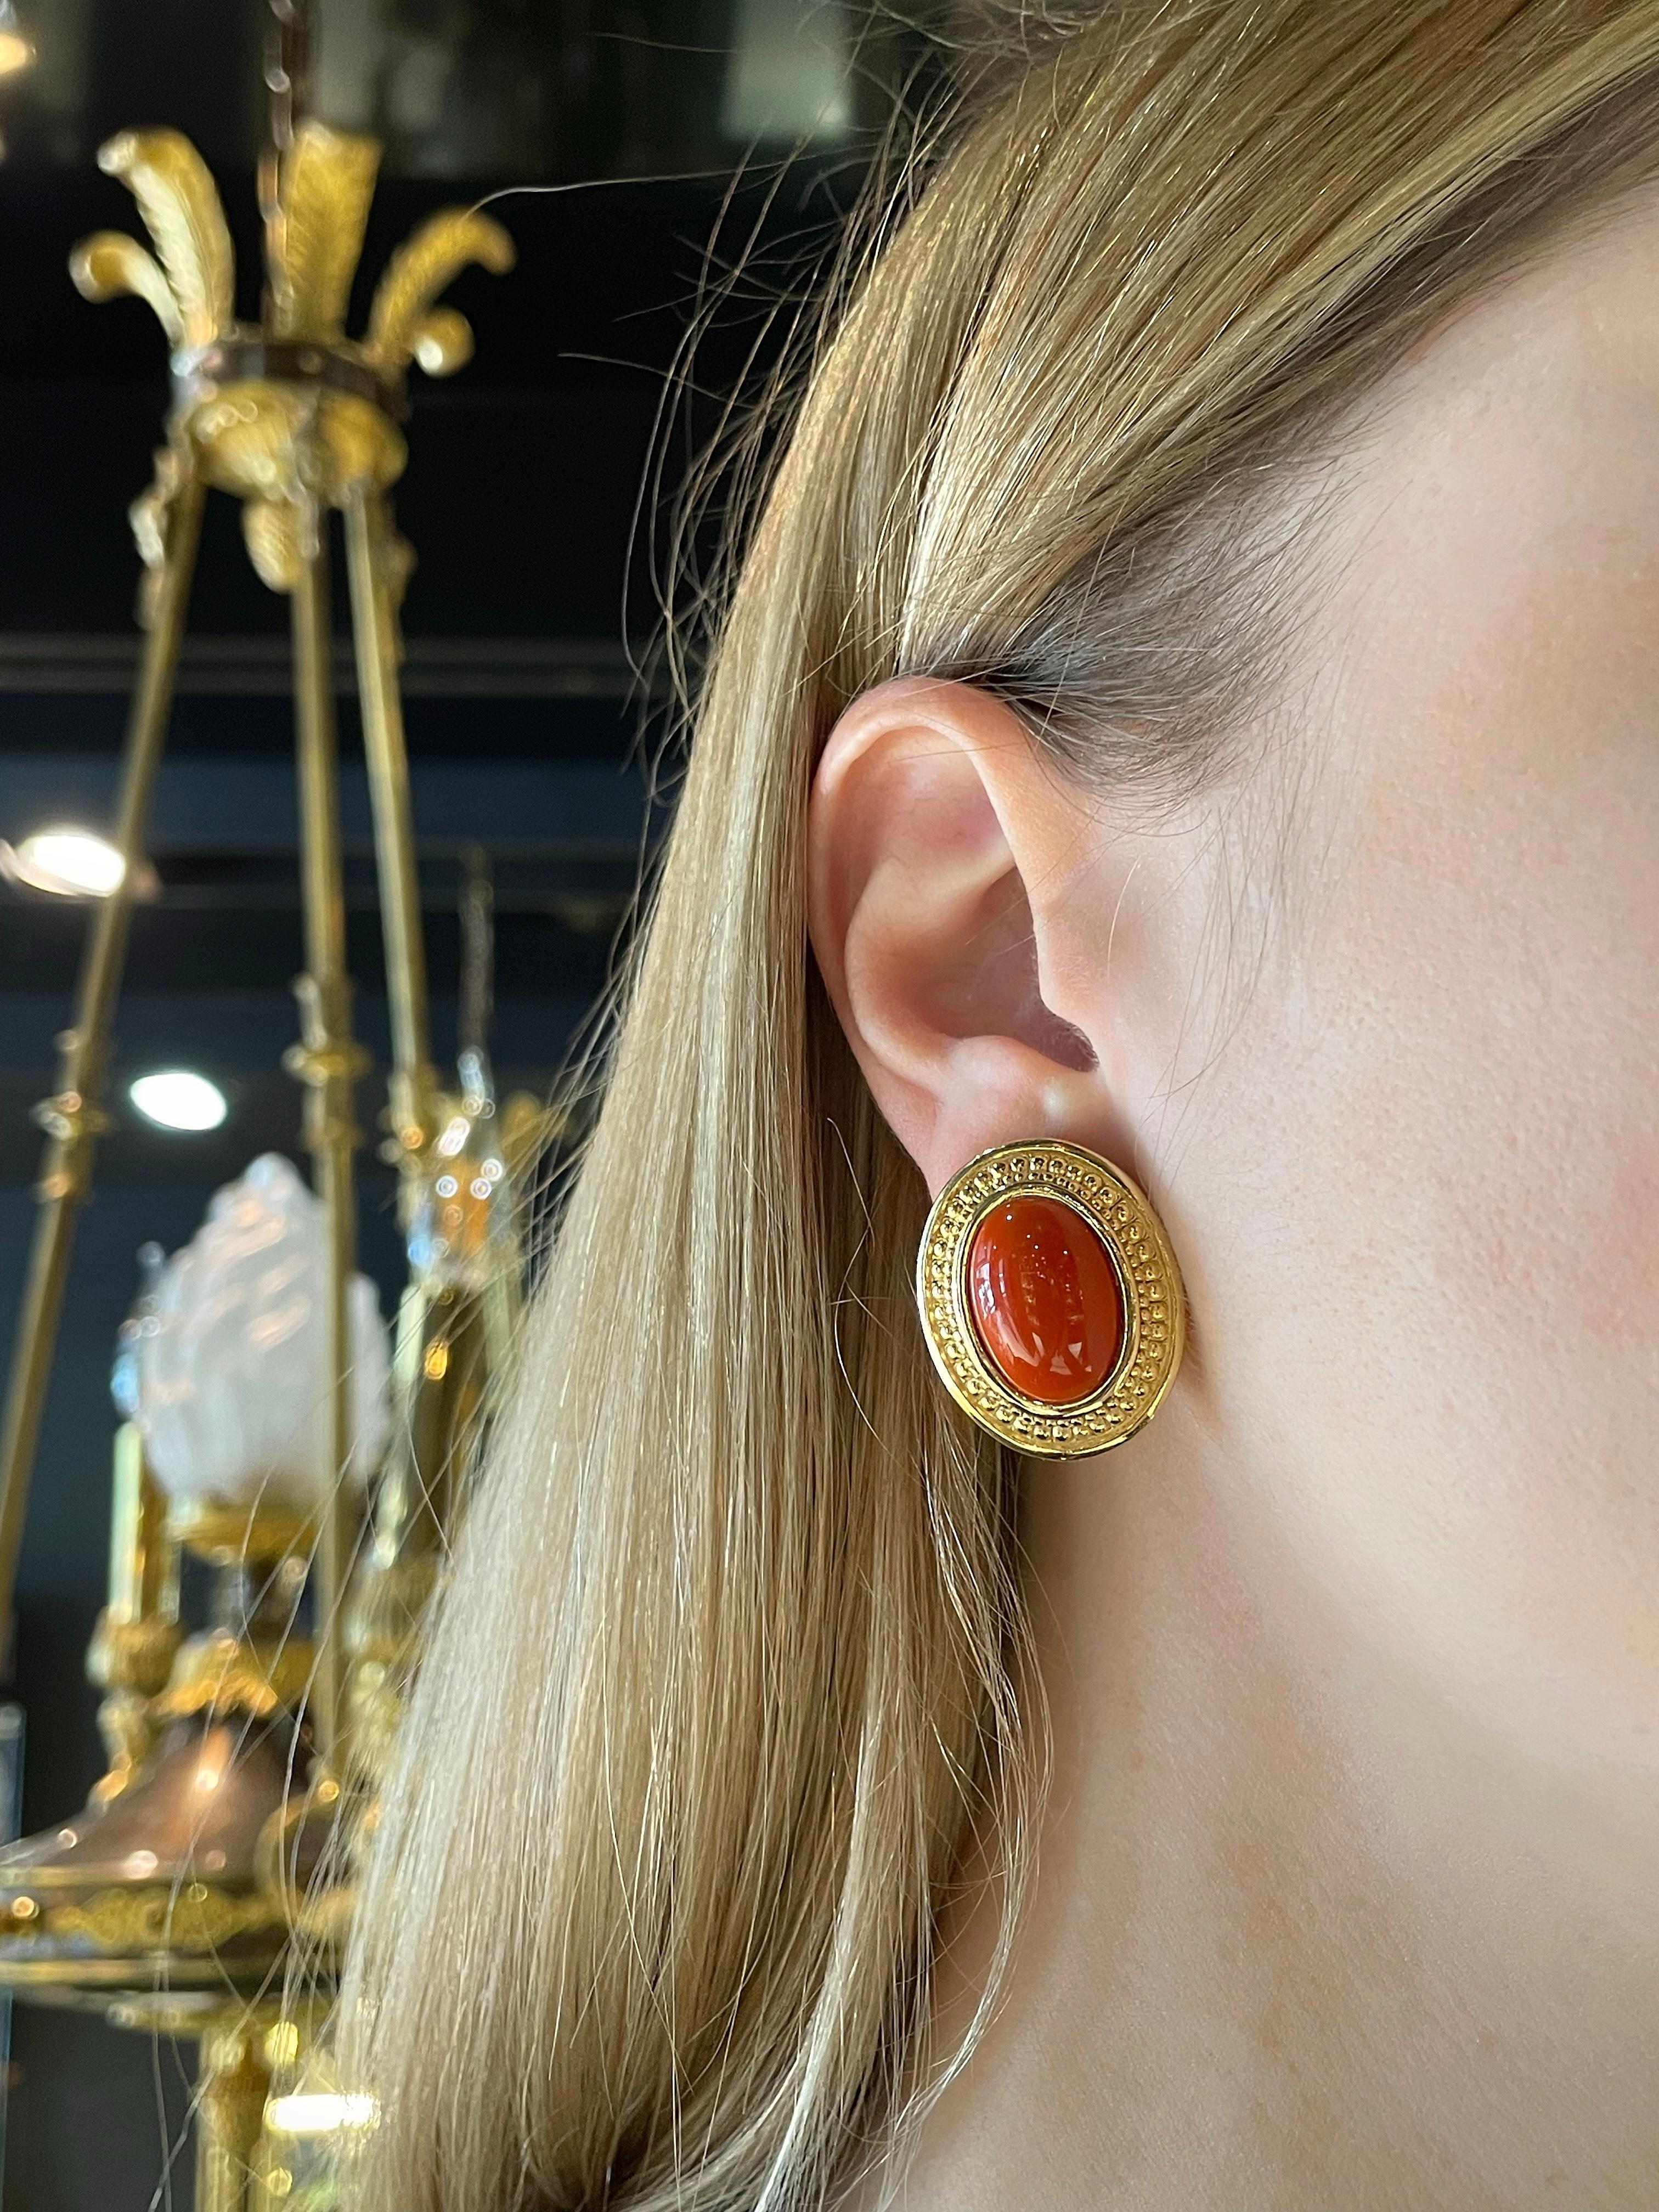 This is an oval clip on earrings designed by Christian Dior in 1980’s. The piece is gold plated, adorned with imitations of orange corals. 

Markings: “Chr. Dior©Germany” (shown in photos).

Size: 2.8x2.3cm

———

If you have any questions, please